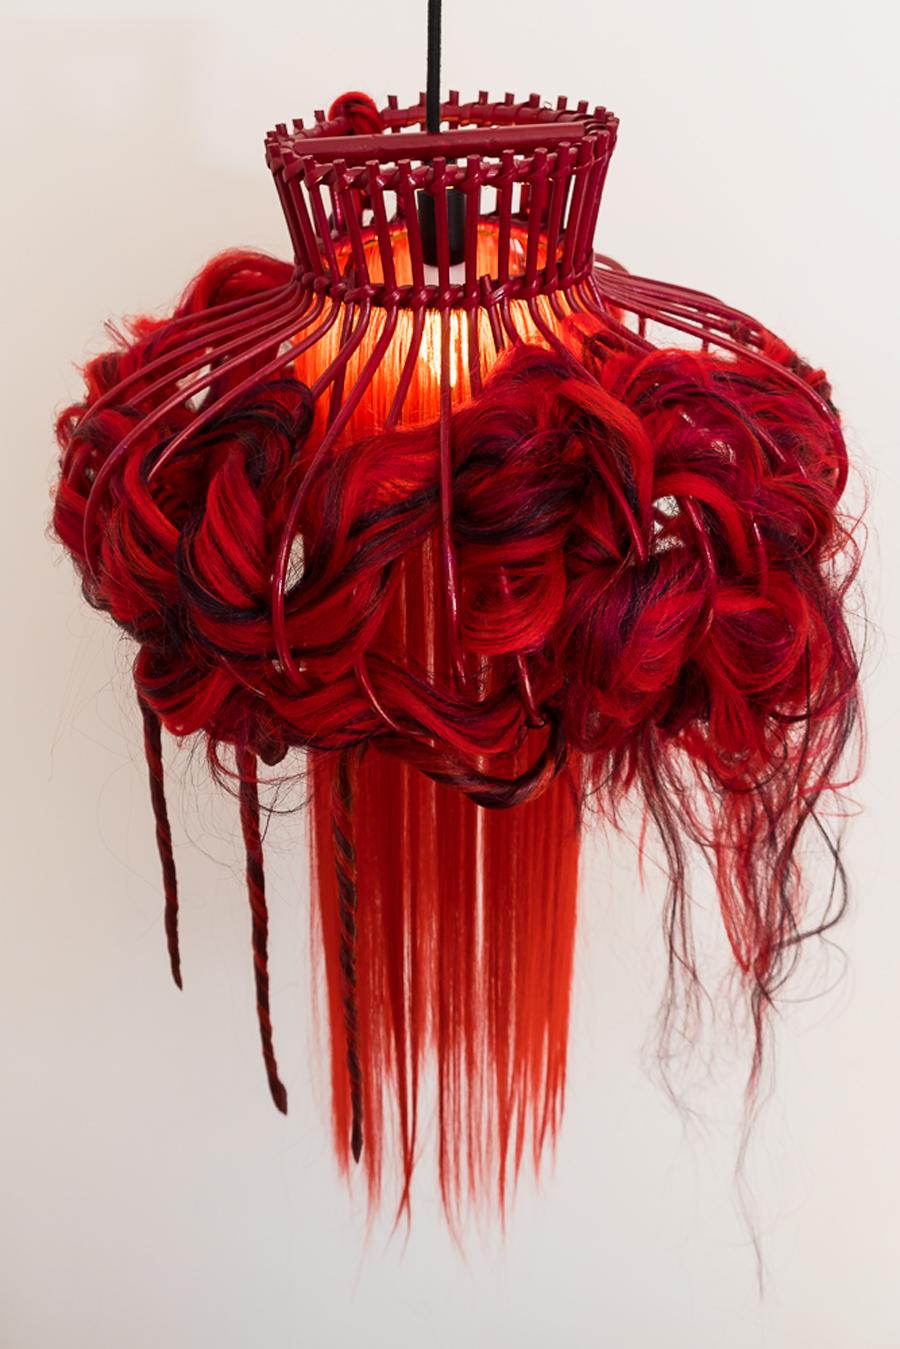 Synthetic Chandelier Create by the Artist Micki Chomicki